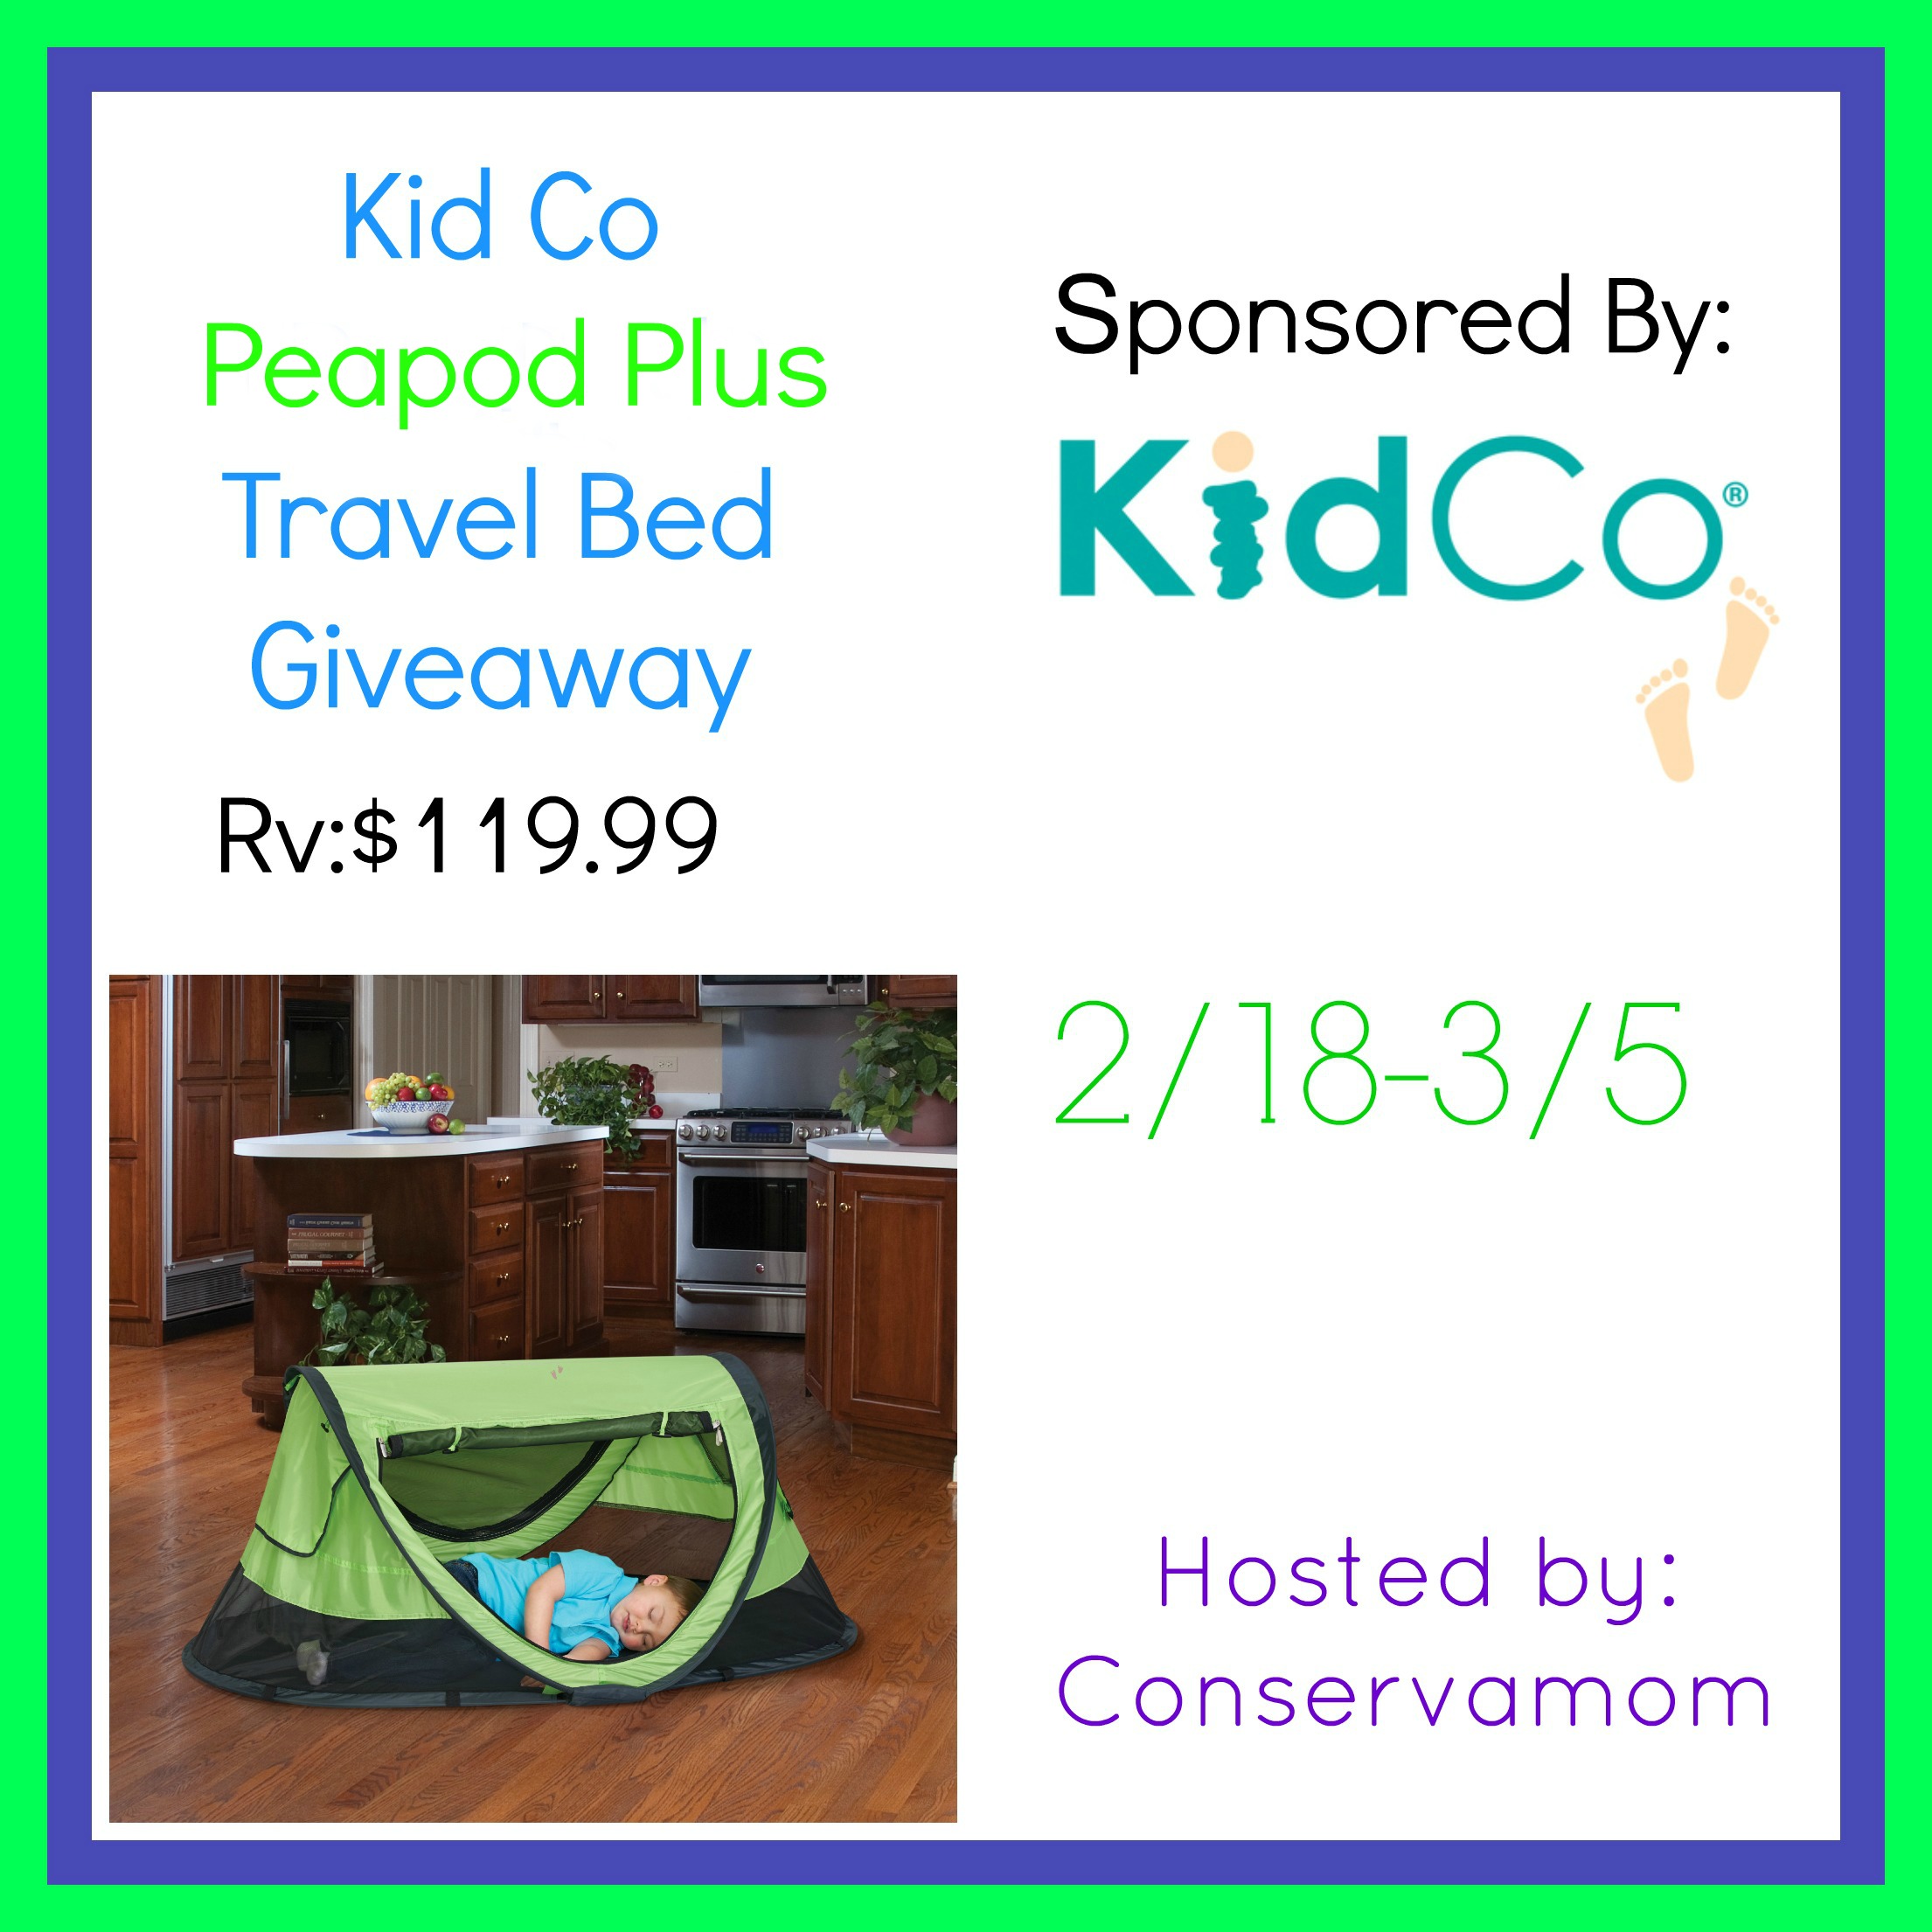 Kid Co Peapod Travel Bed Giveaway